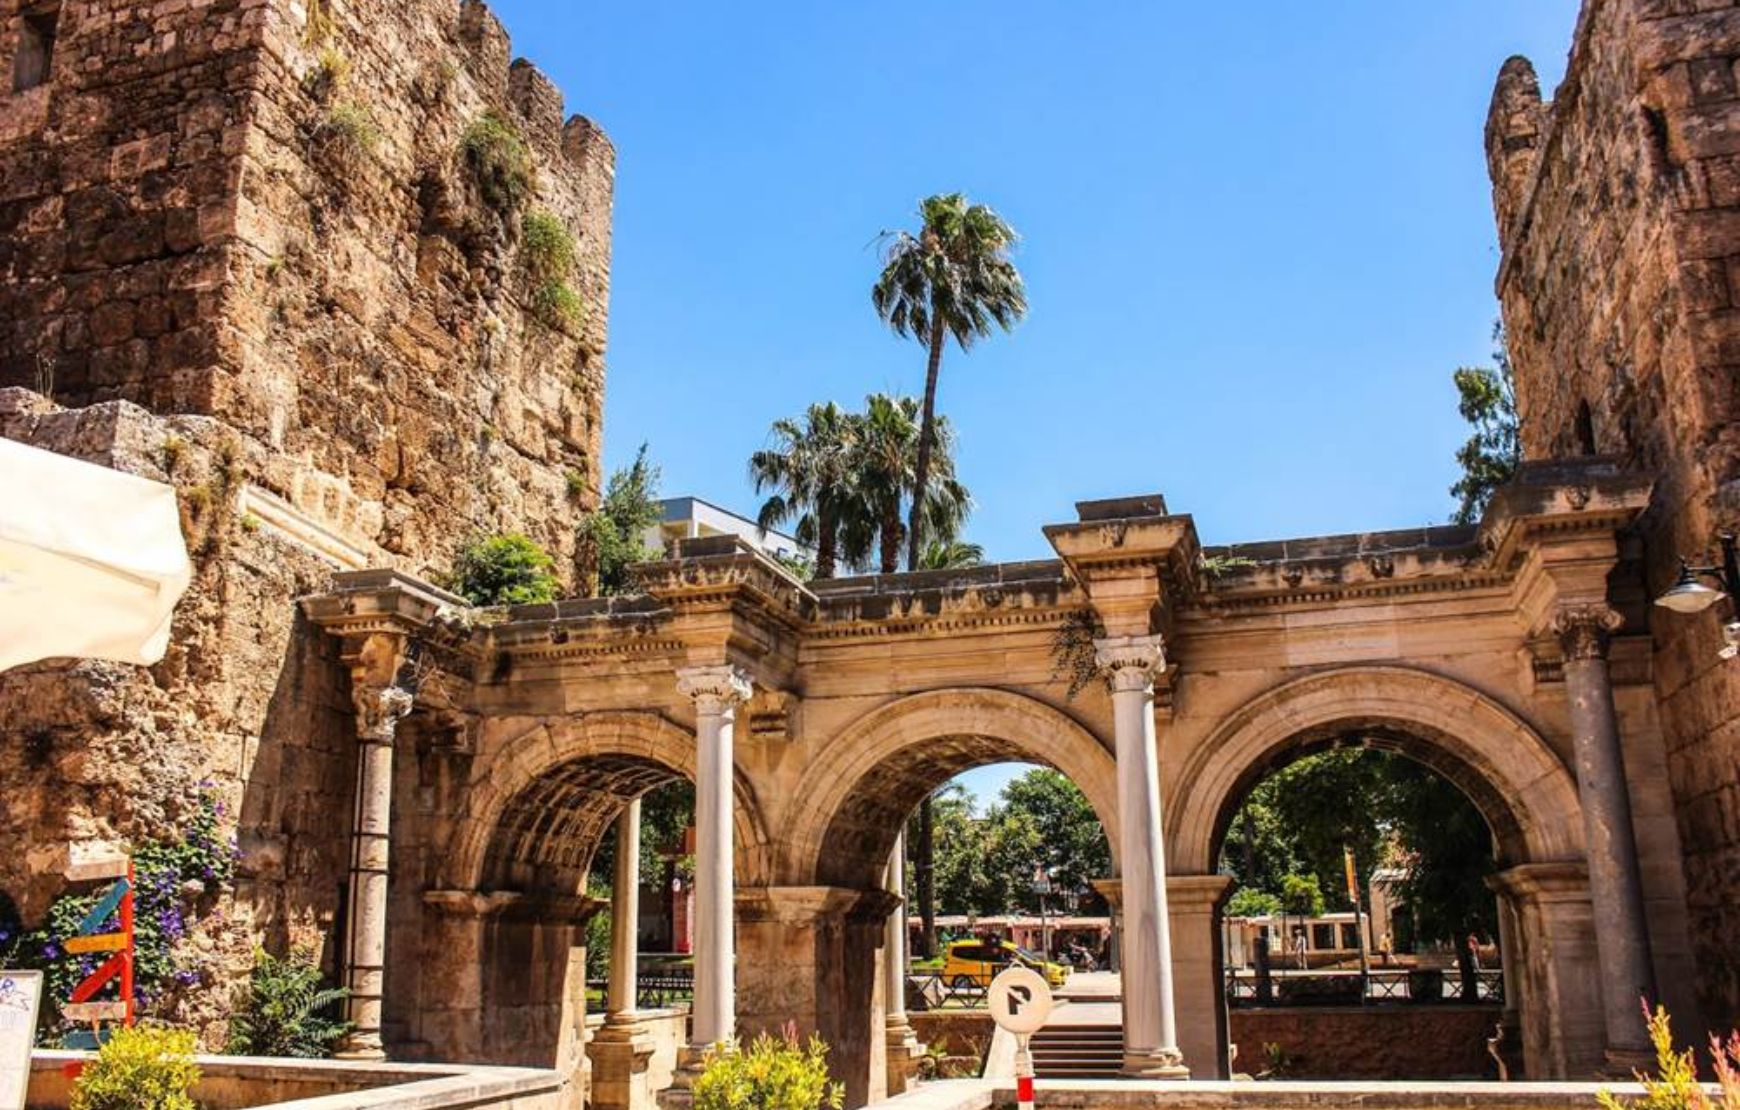 Visit Hadrian's gate in our Antalya City Tour